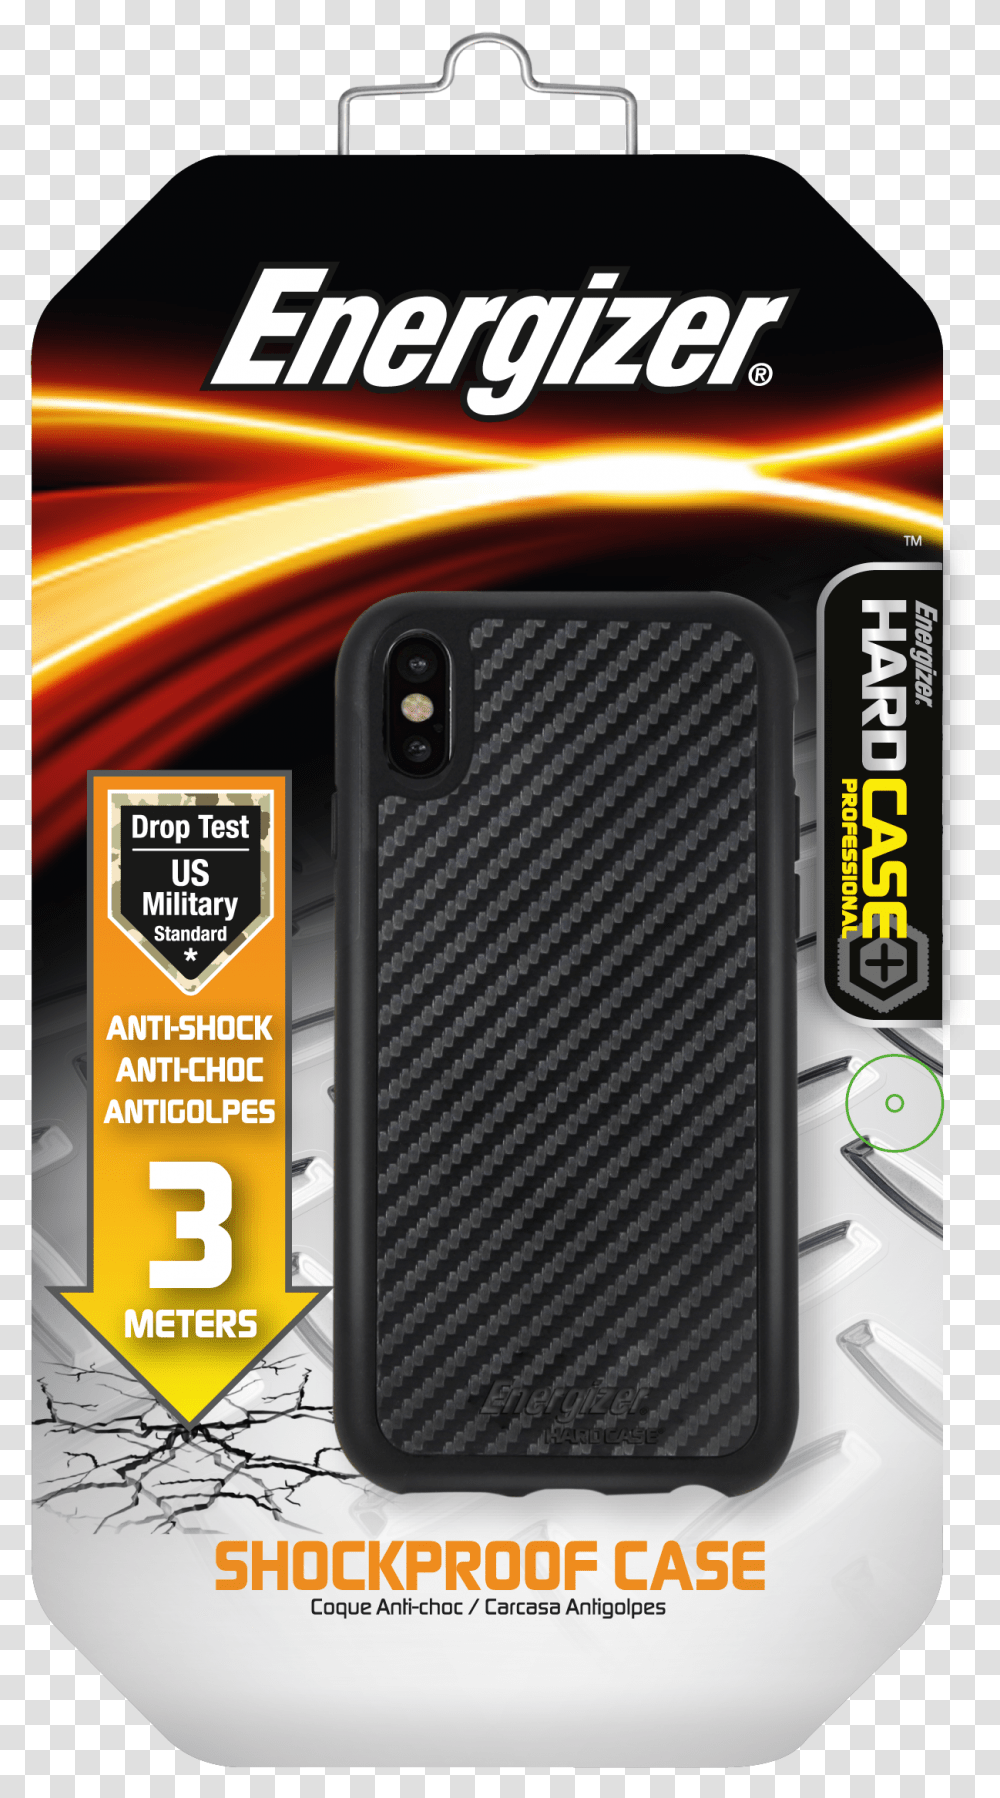 Energizer Mobile Phones Accessories Arrive To Thailand Energizer Hard Case Iphone, Electronics, Cell Phone, Light, Text Transparent Png